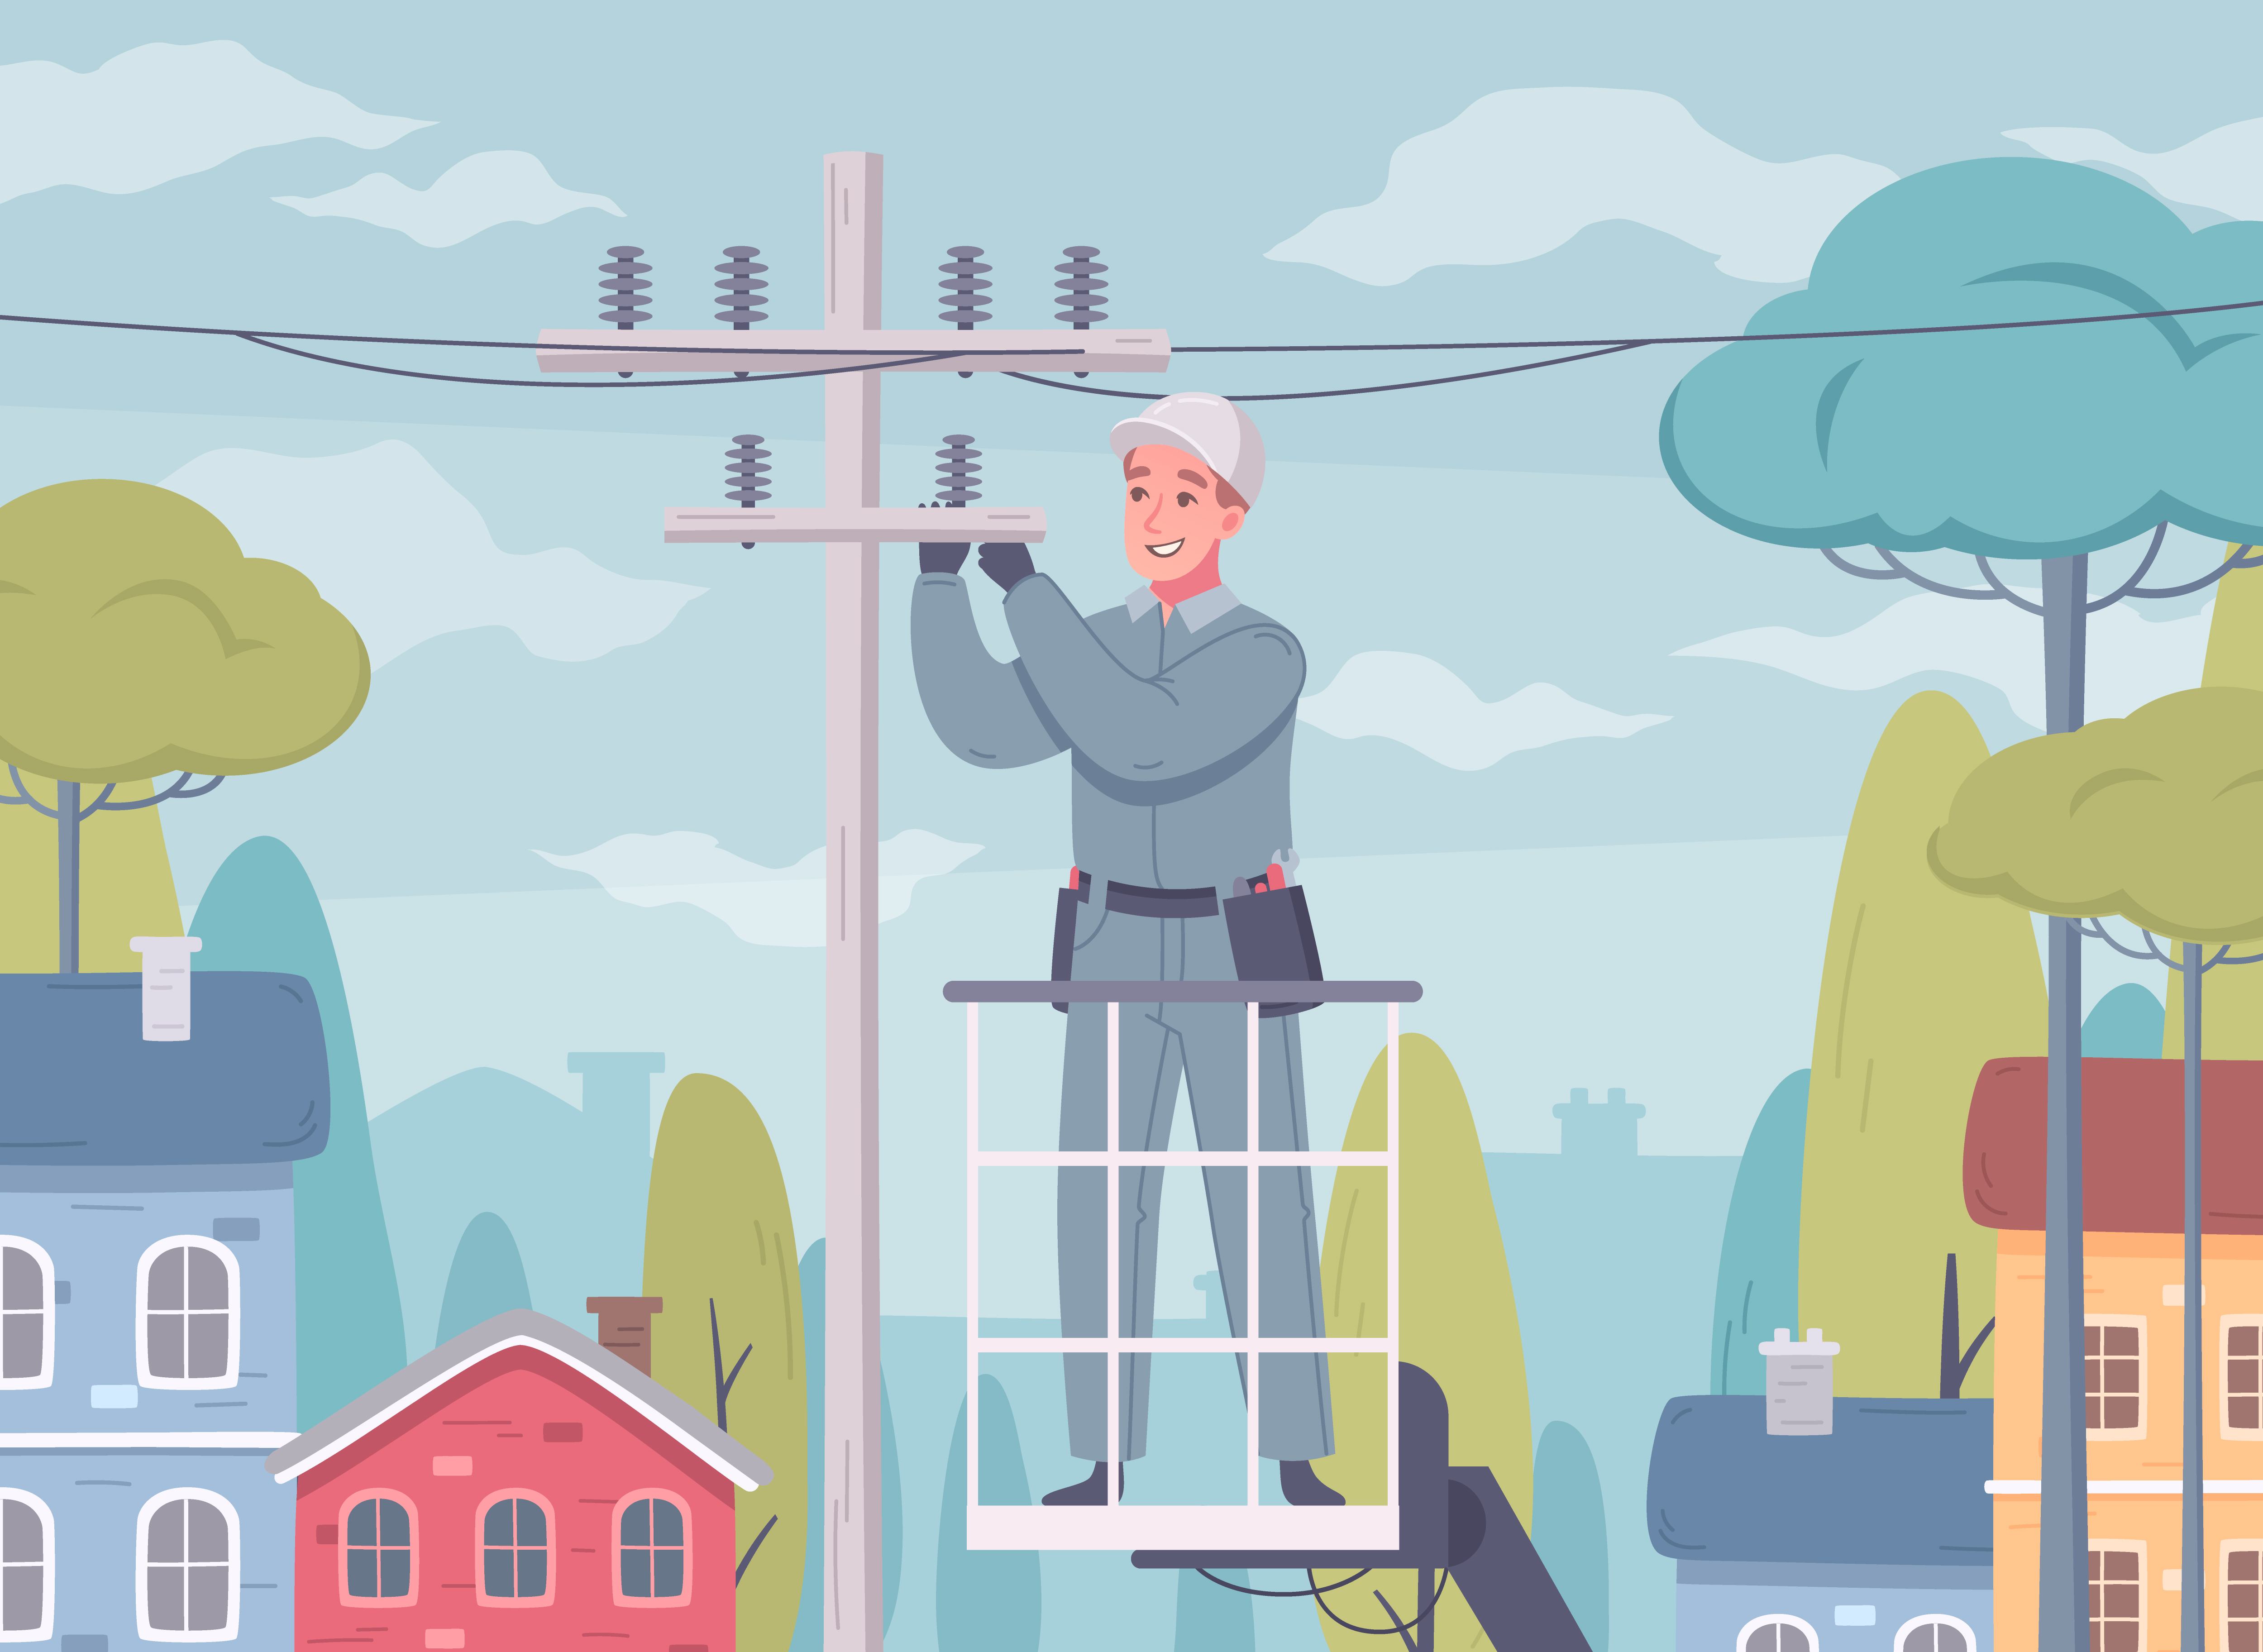 Electrician cartoon composition with outdoor scenery and man in uniform working with power lines on post vector illustration